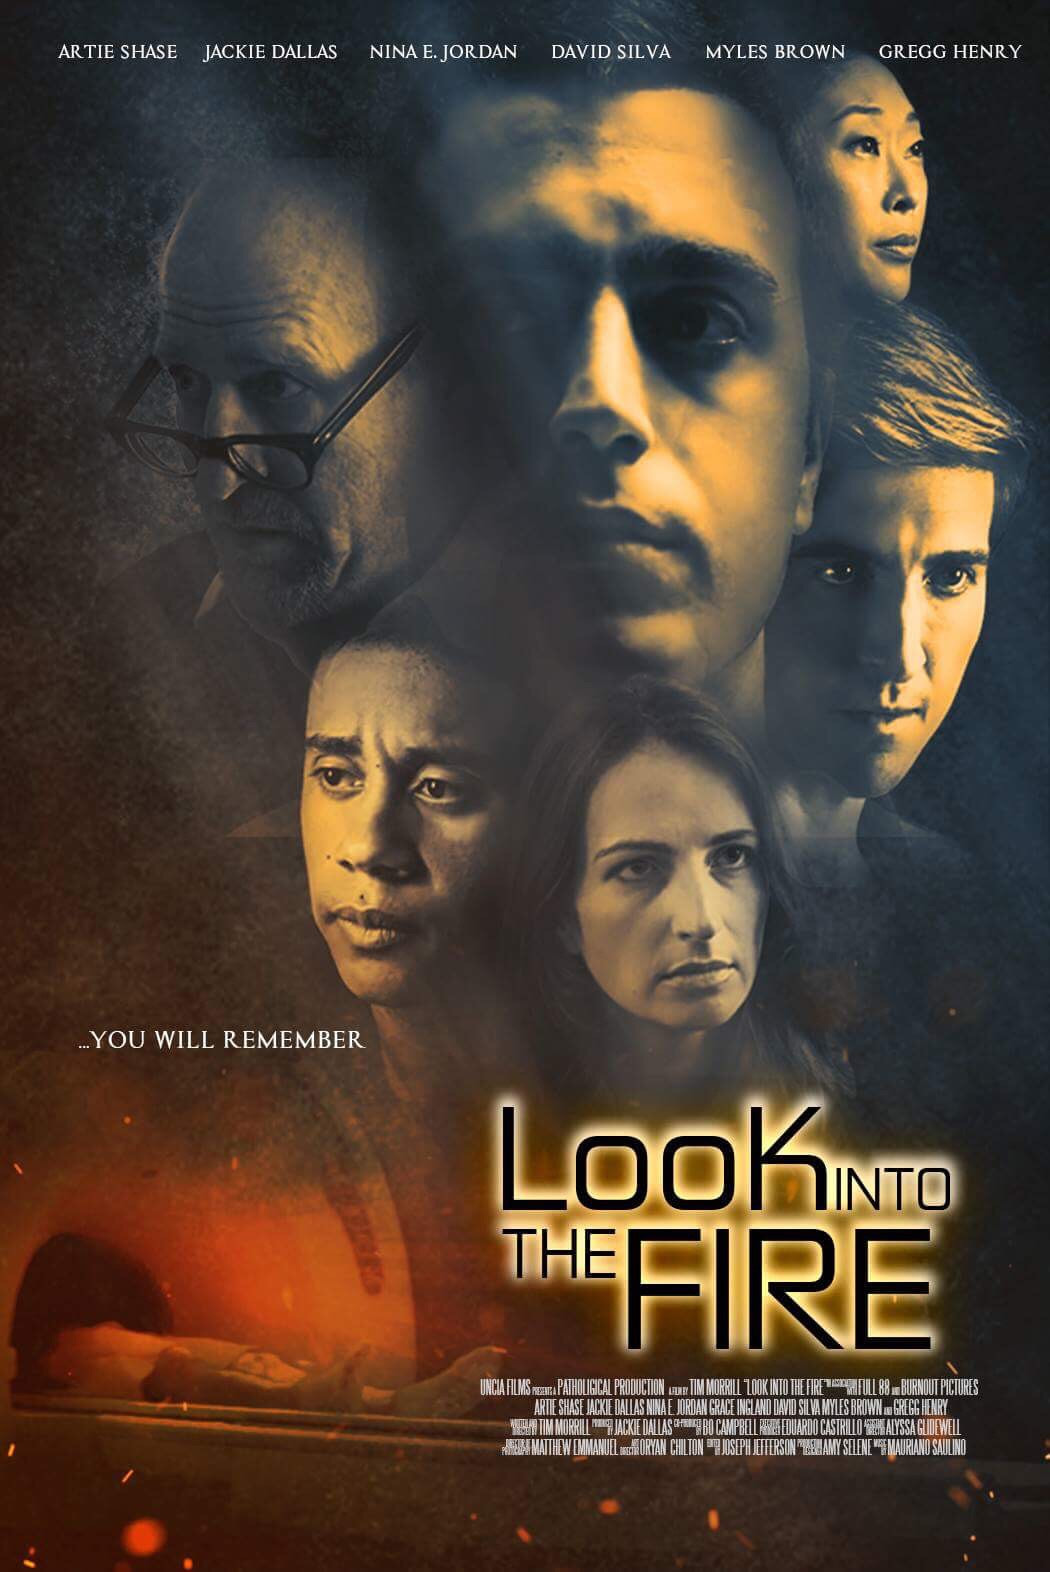 Look into the Fire poster.